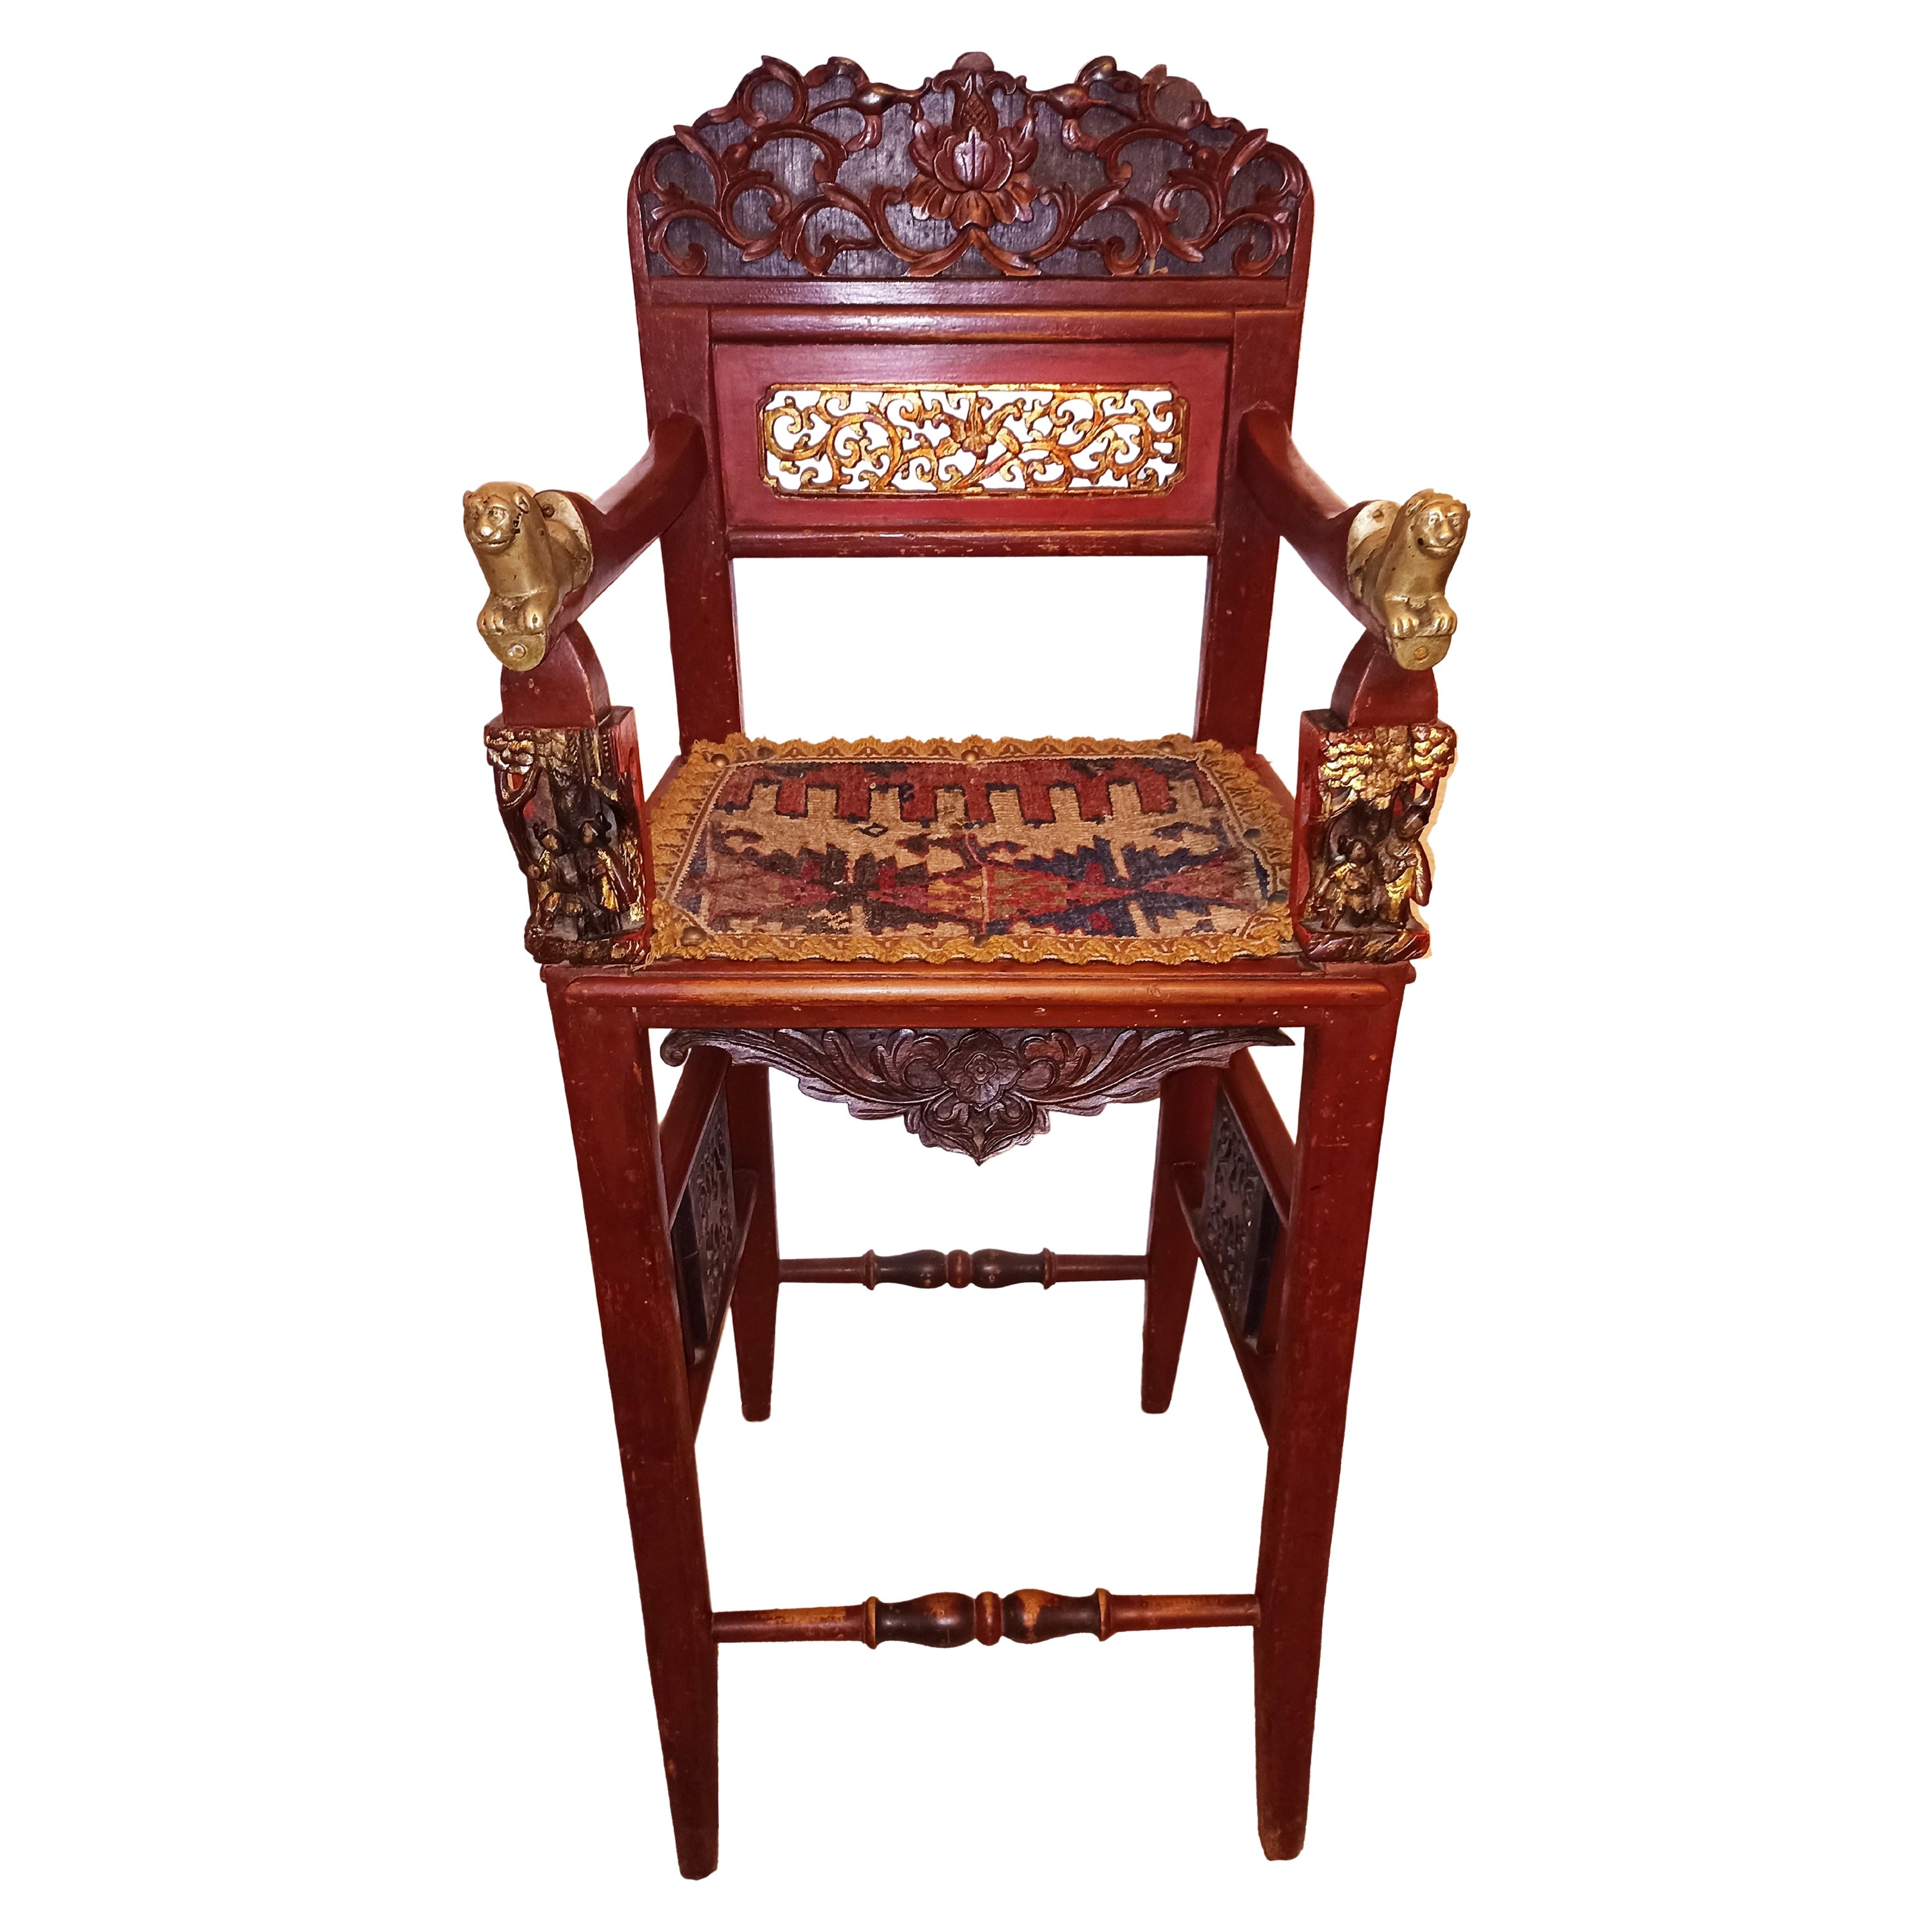 Stunning Early 20th Century Chinese Cinnabar Lacquered Royal Childs Thronechair For Sale